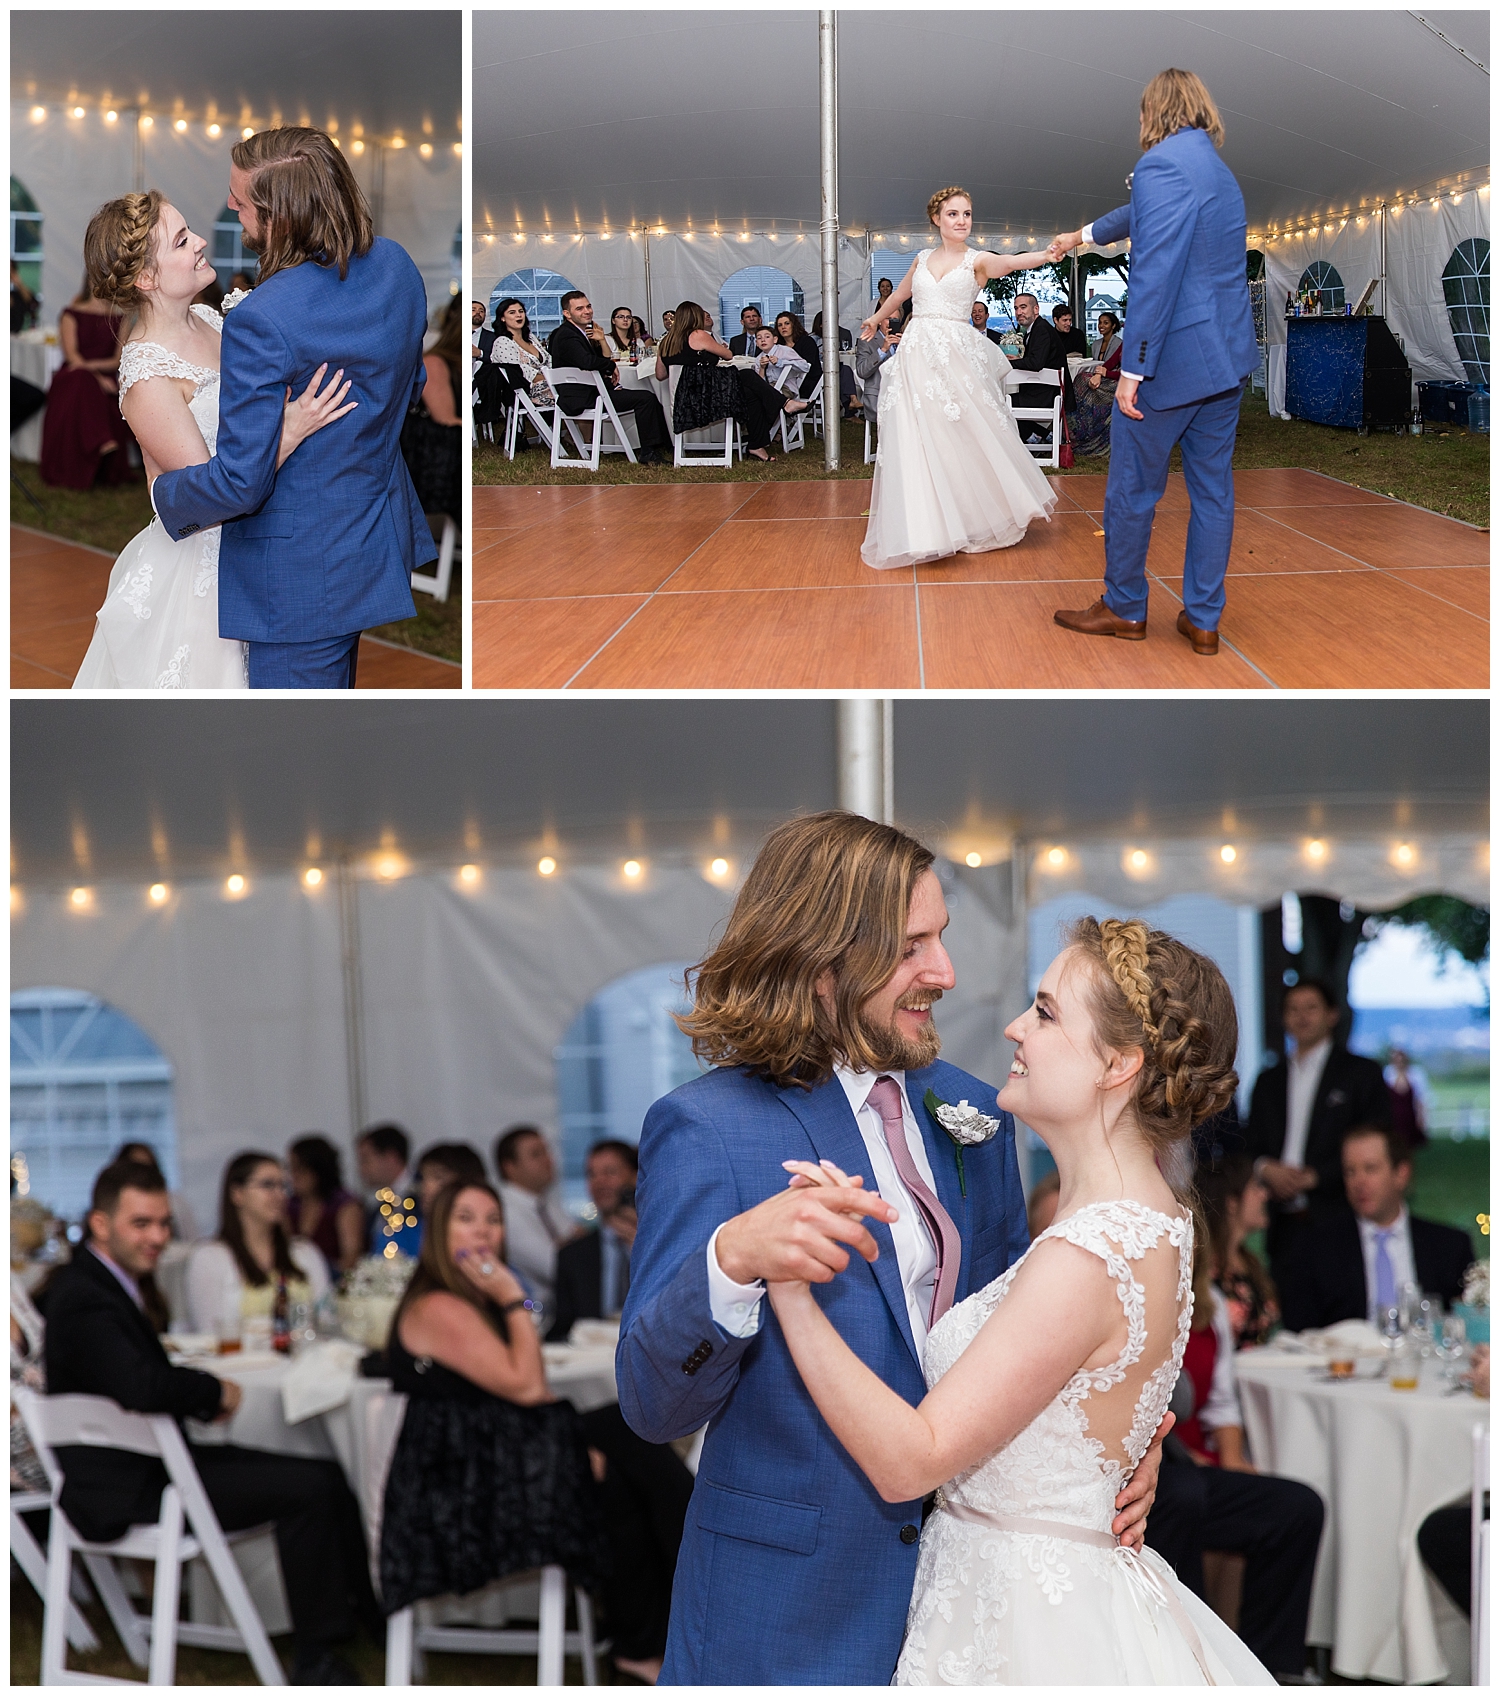 First dance to "Sleep Walk" by Santos and Johnny. Goffstown, New Hampshire wedding at a private estate. Photography by Halie Olszowy.